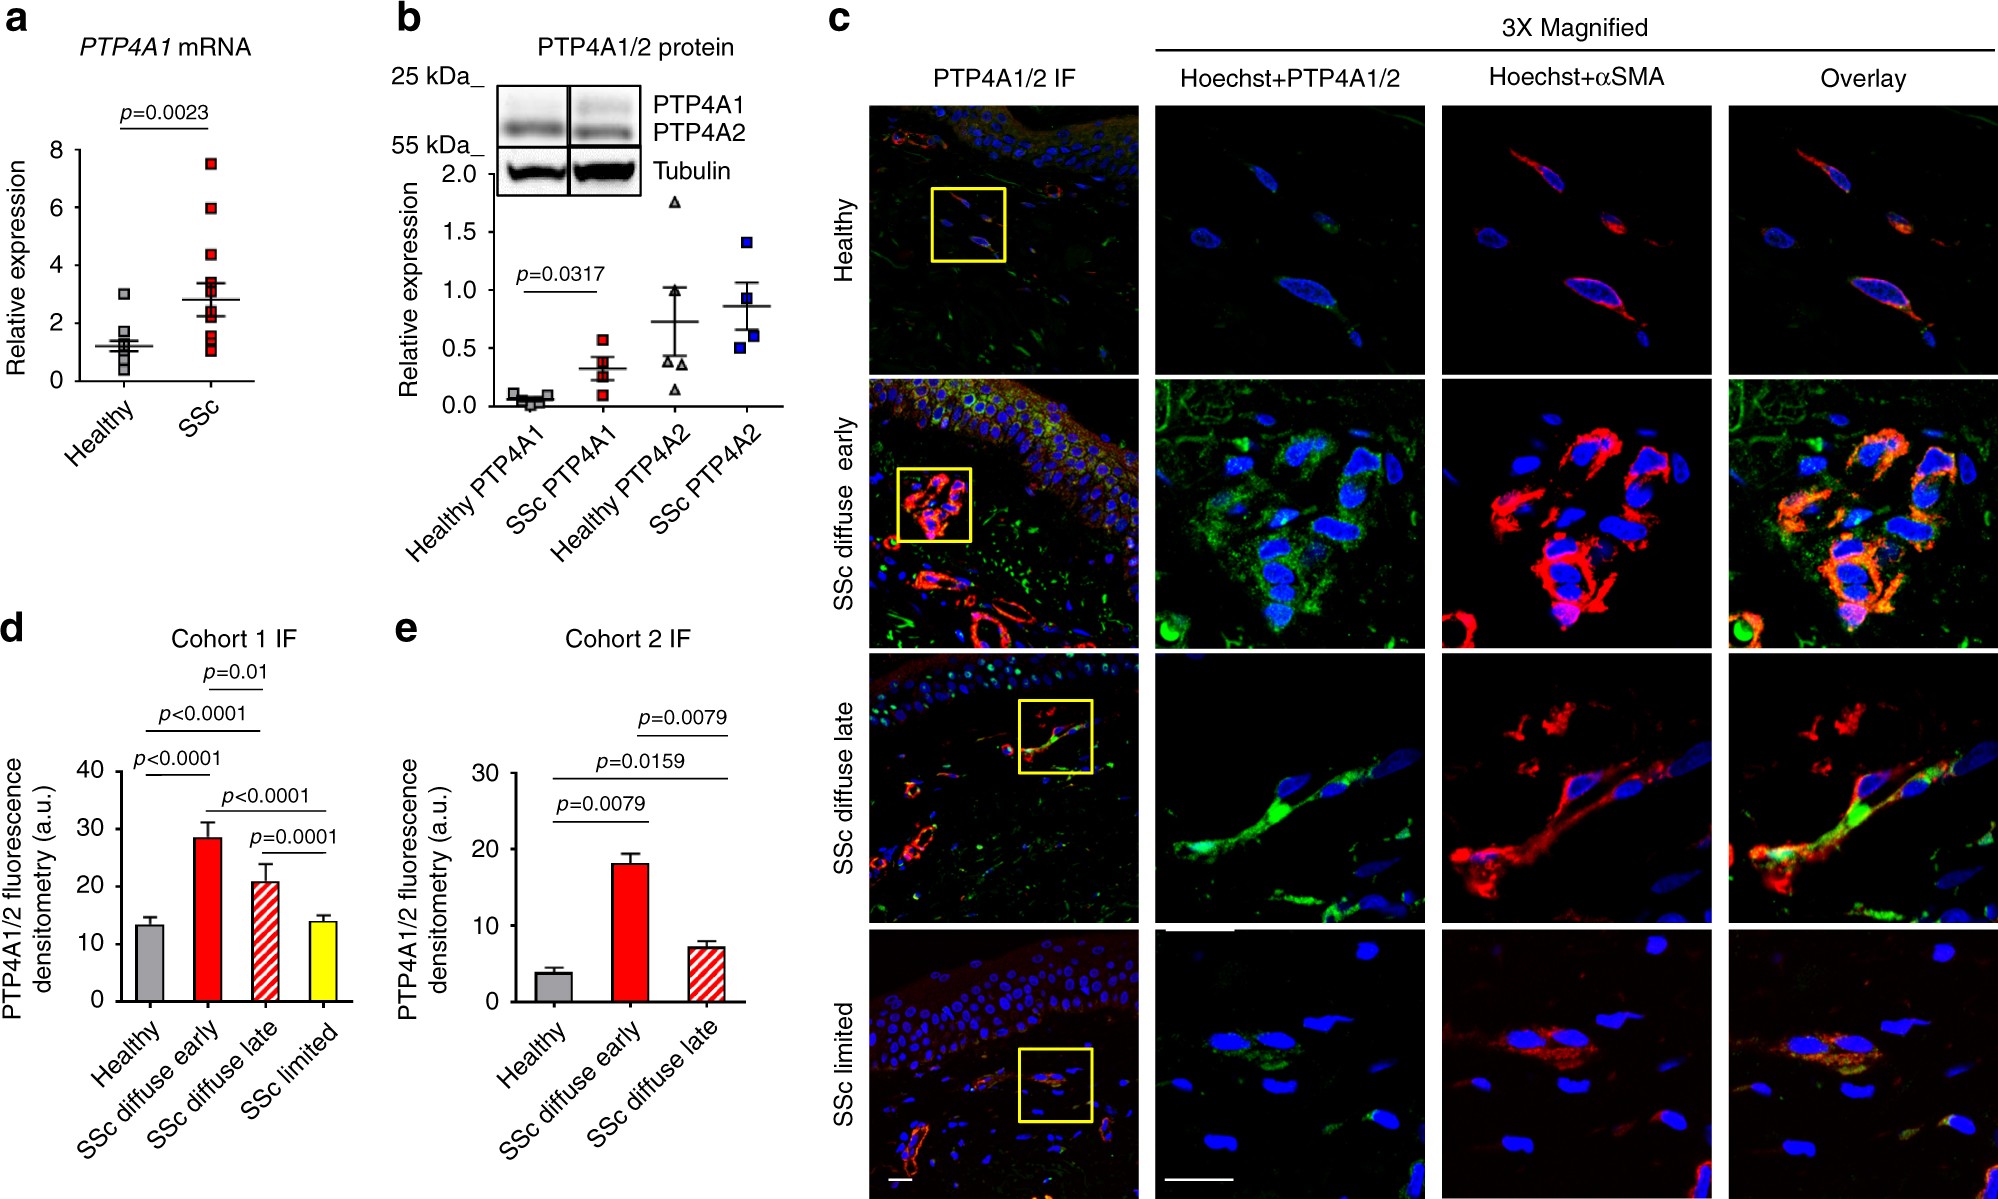 PTP4A1 promotes TGFβ signaling and fibrosis in systemic sclerosis ...